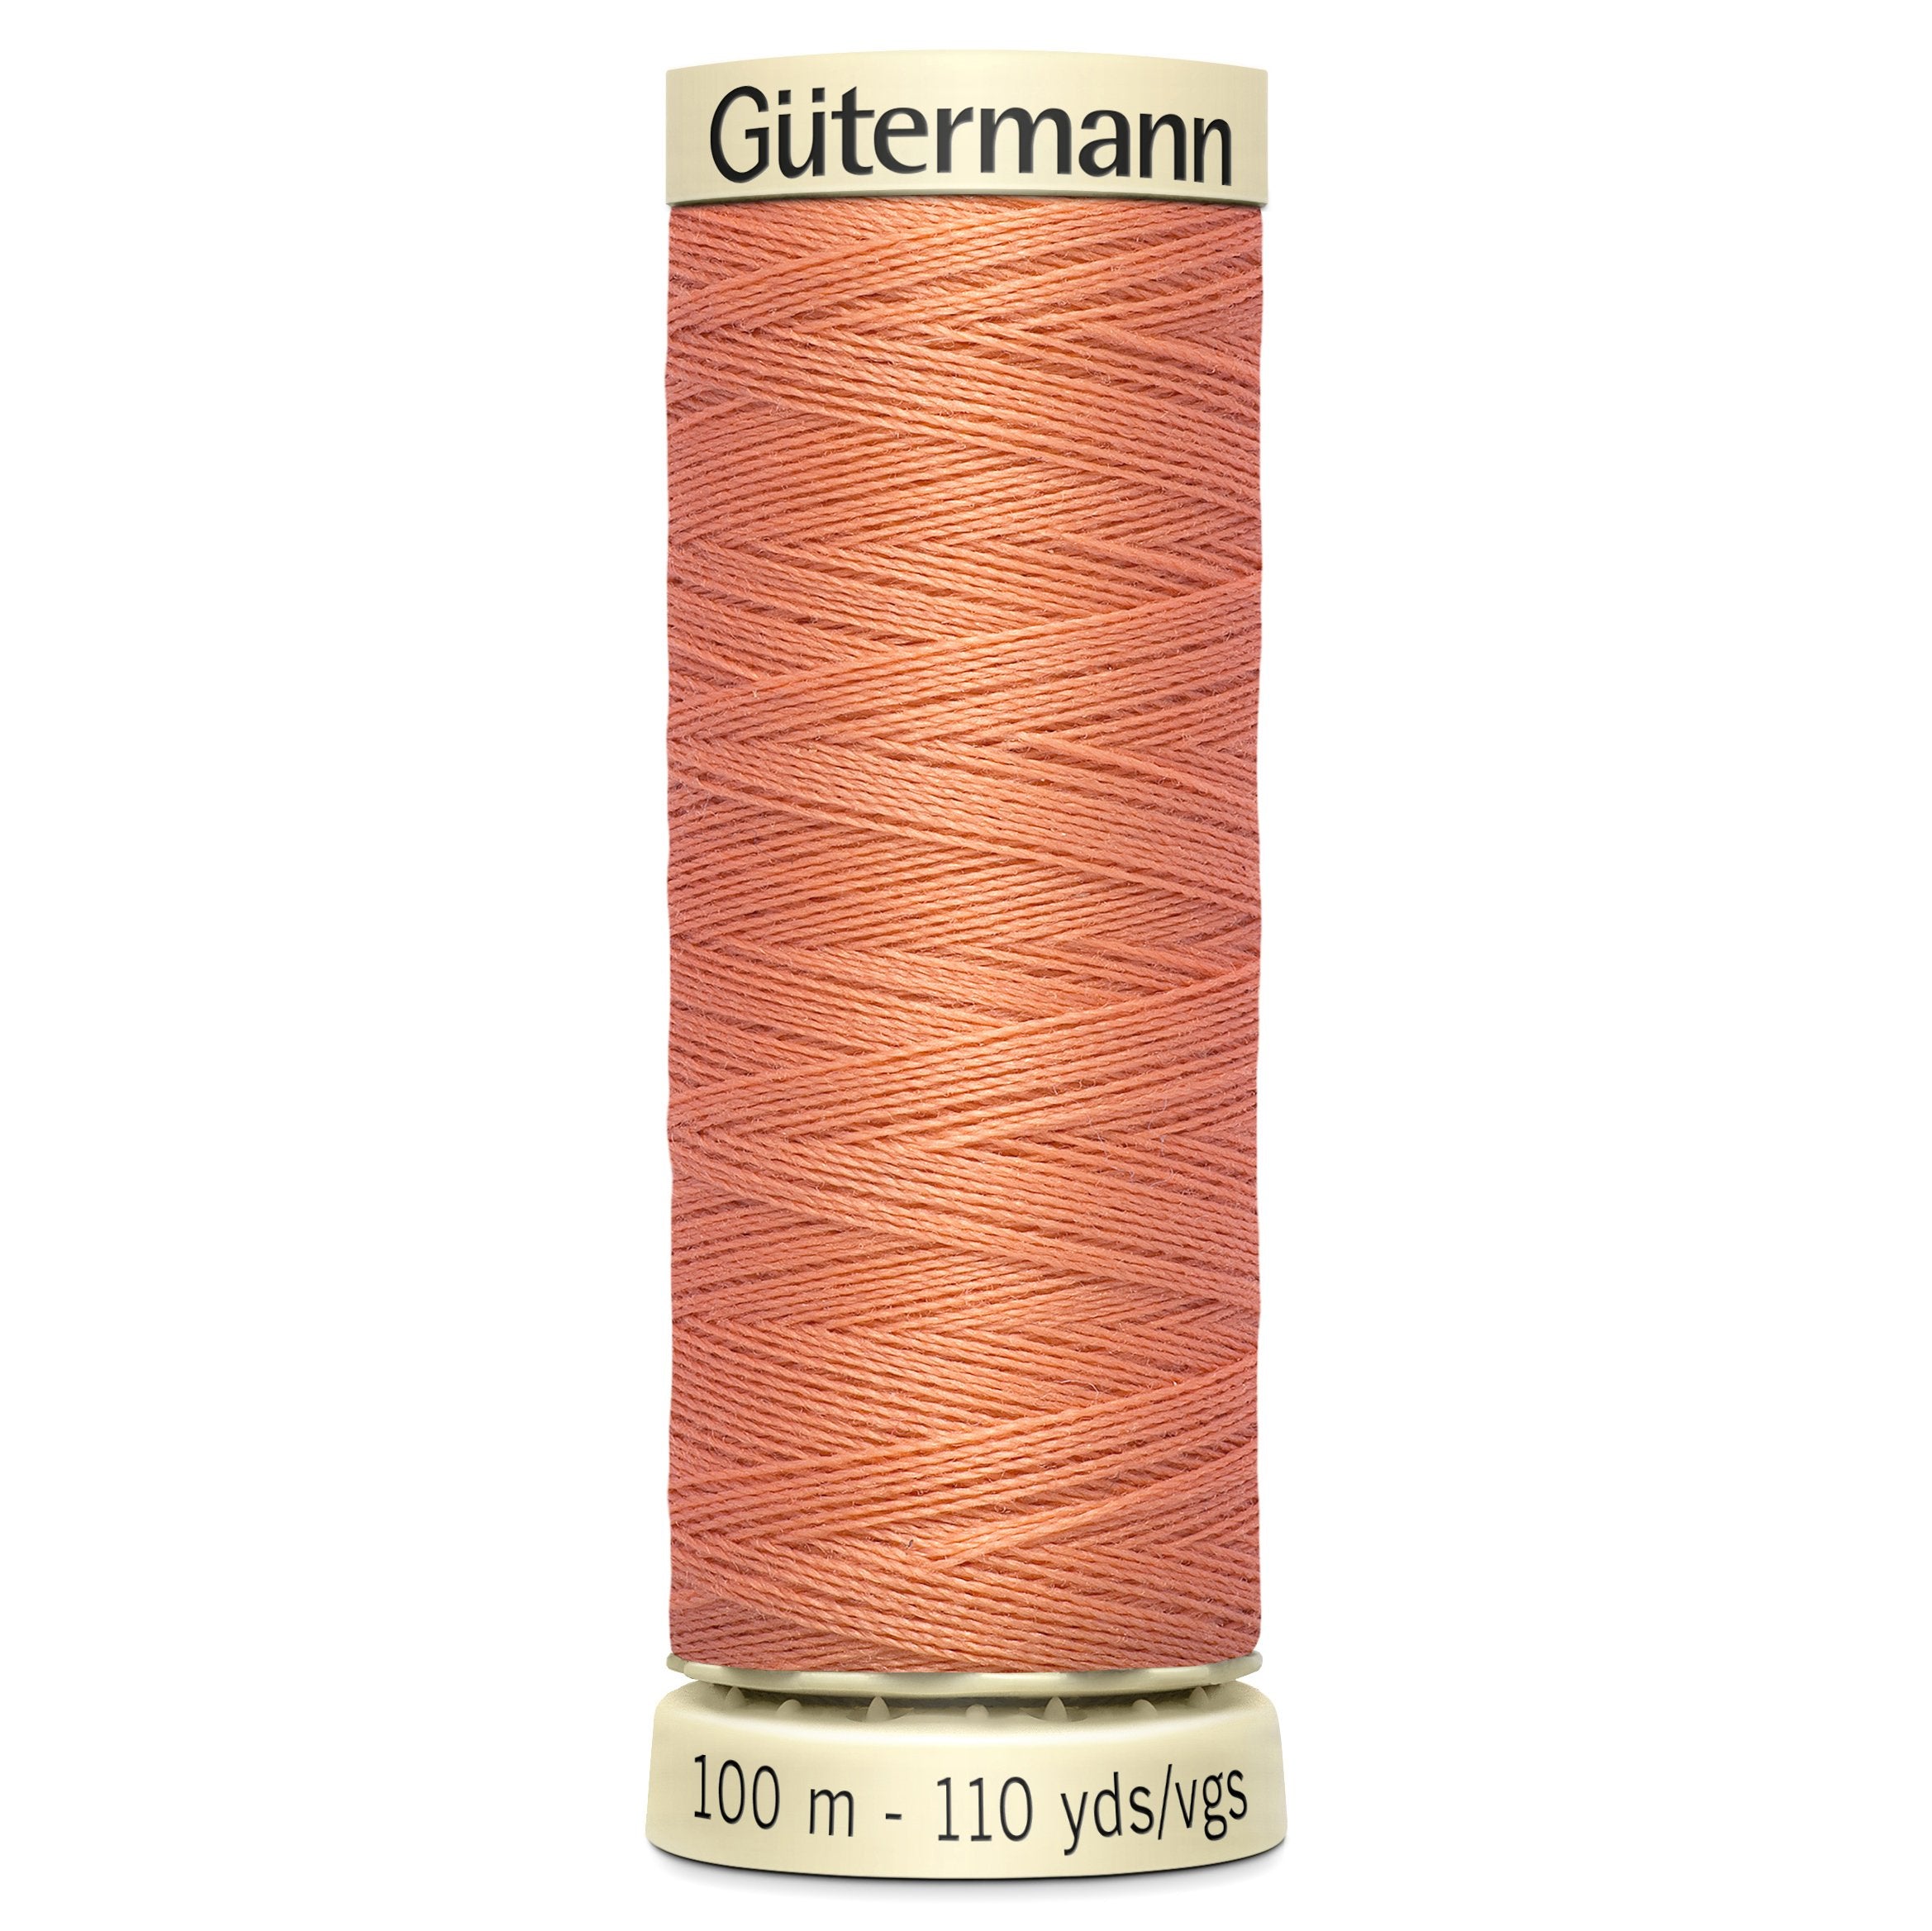 Gutermann Sew All Thread colour 587 Sandlewood from Jaycotts Sewing Supplies